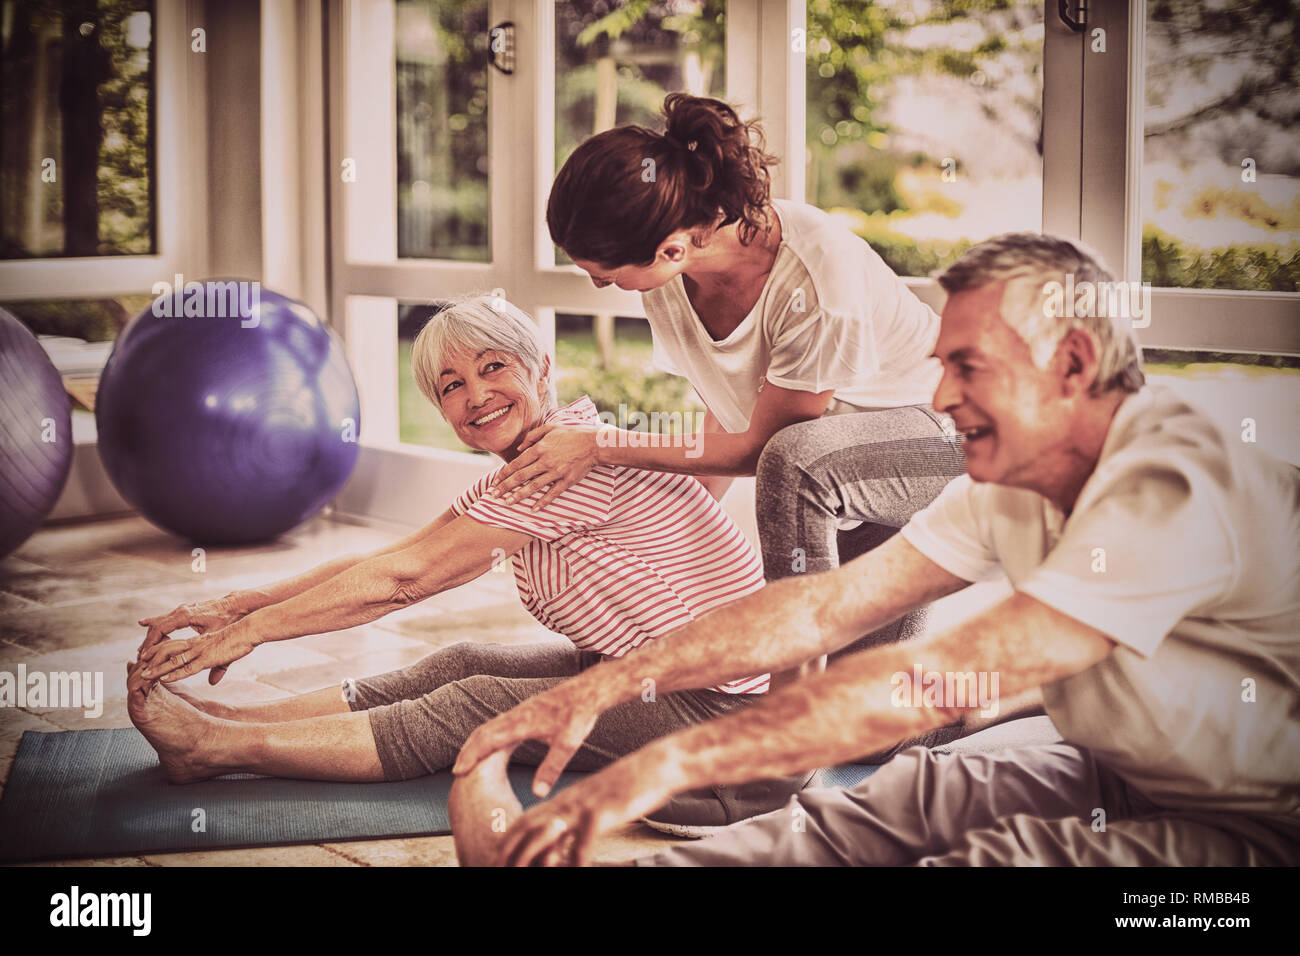 Female trainer assisting senior couple in performing exercise Stock Photo